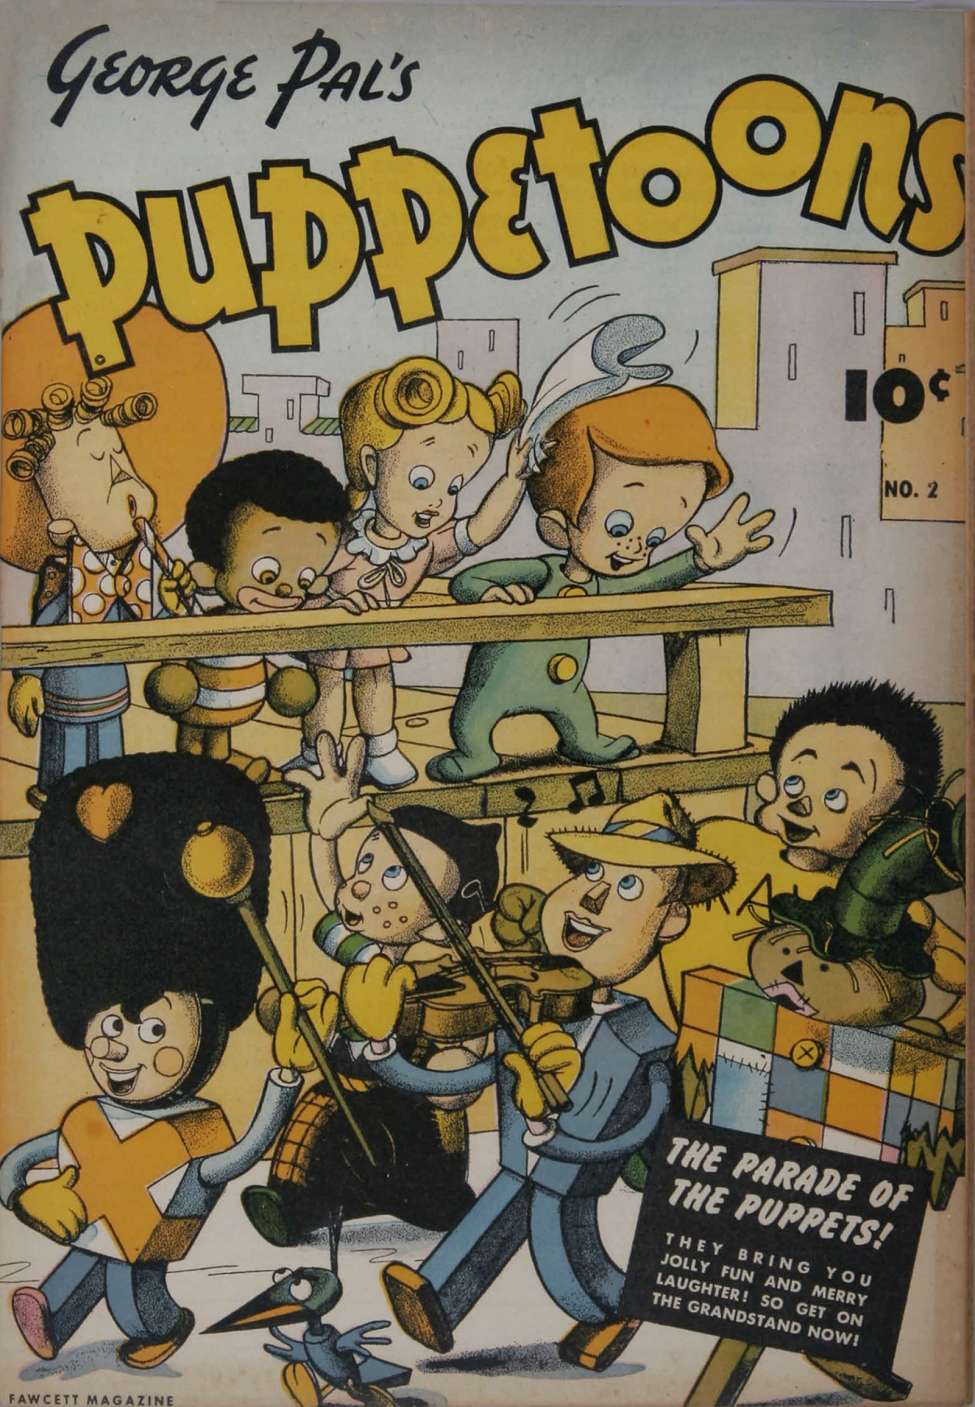 Comic Book Cover For George Pal's Puppetoons 2